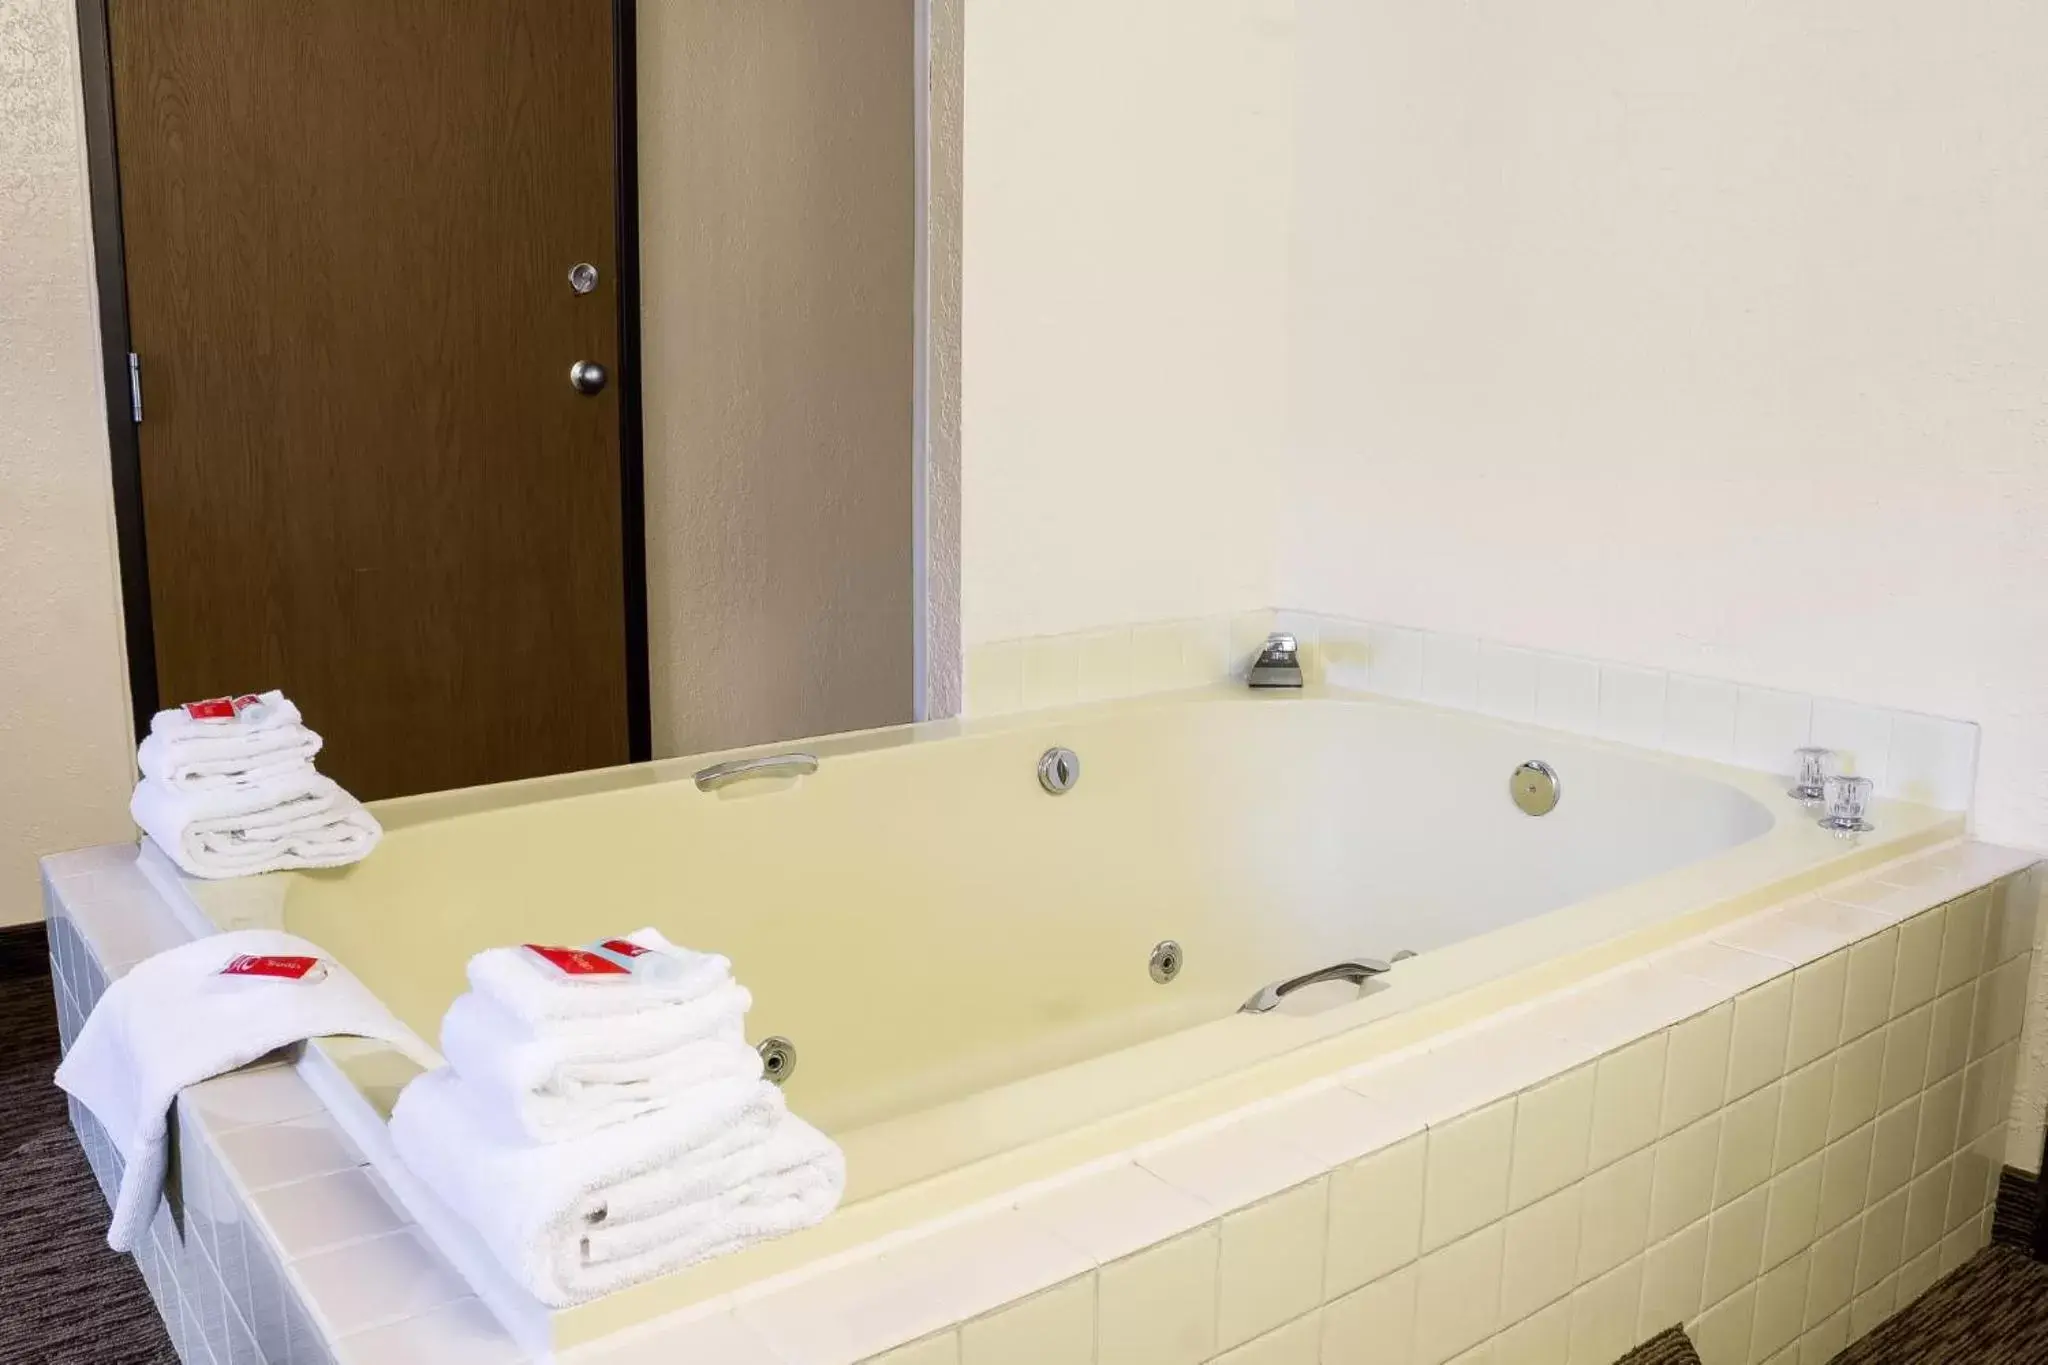 Hot Tub in Econo Lodge, Downtown Custer Near Custer State Park and Mt Rushmore